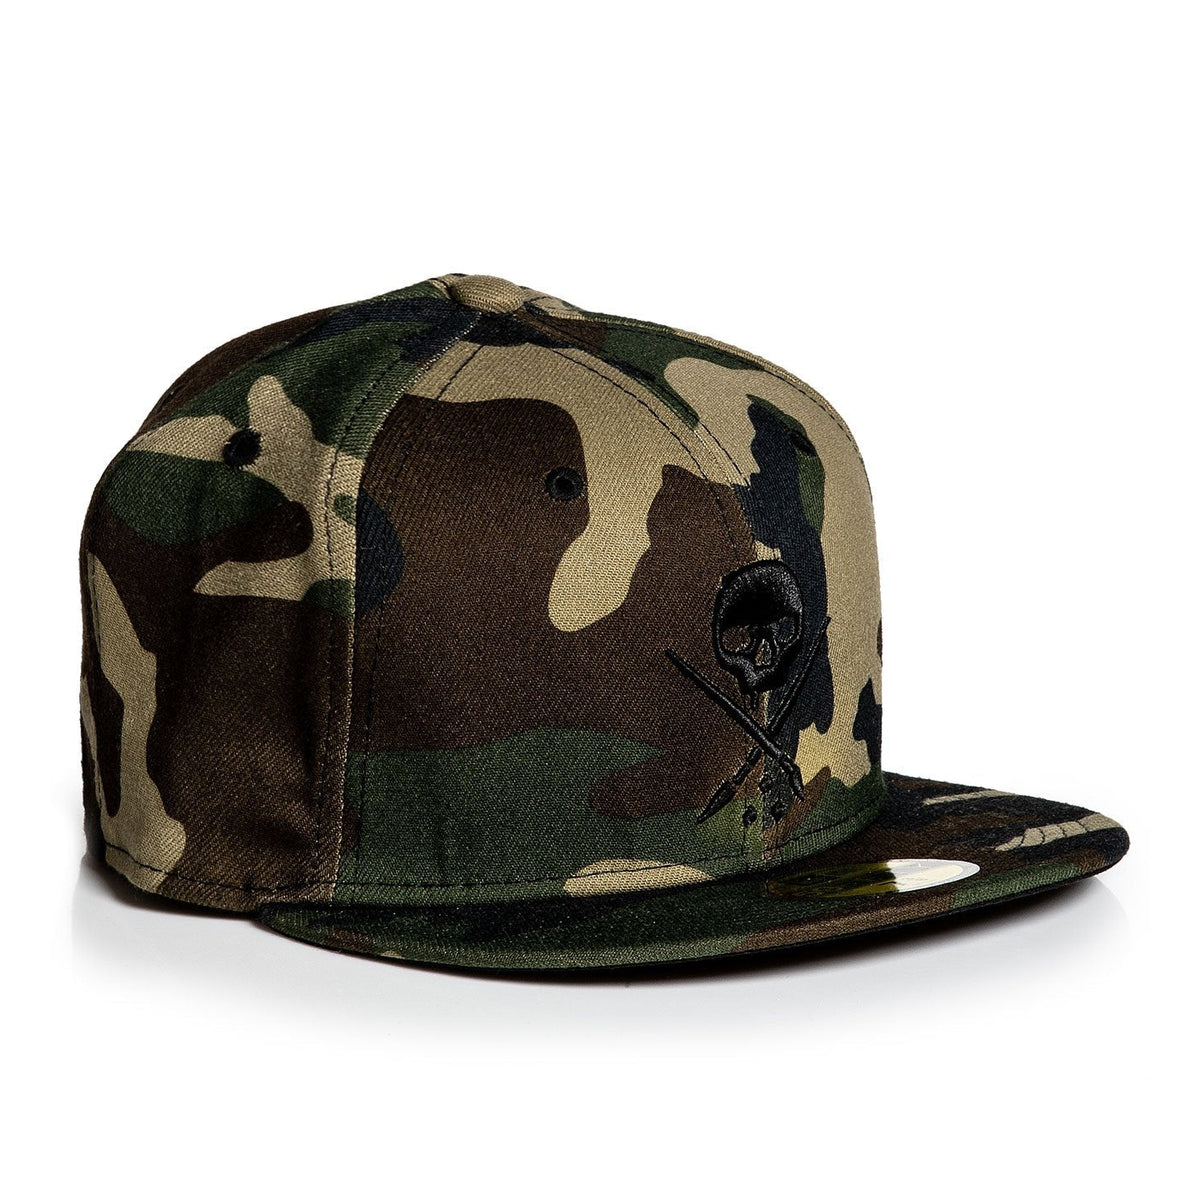 Sullen Badge Camo Stretched Fitted Cap-Mens Beanies, Hats &amp; Snapback Caps-Scarlett Dawn